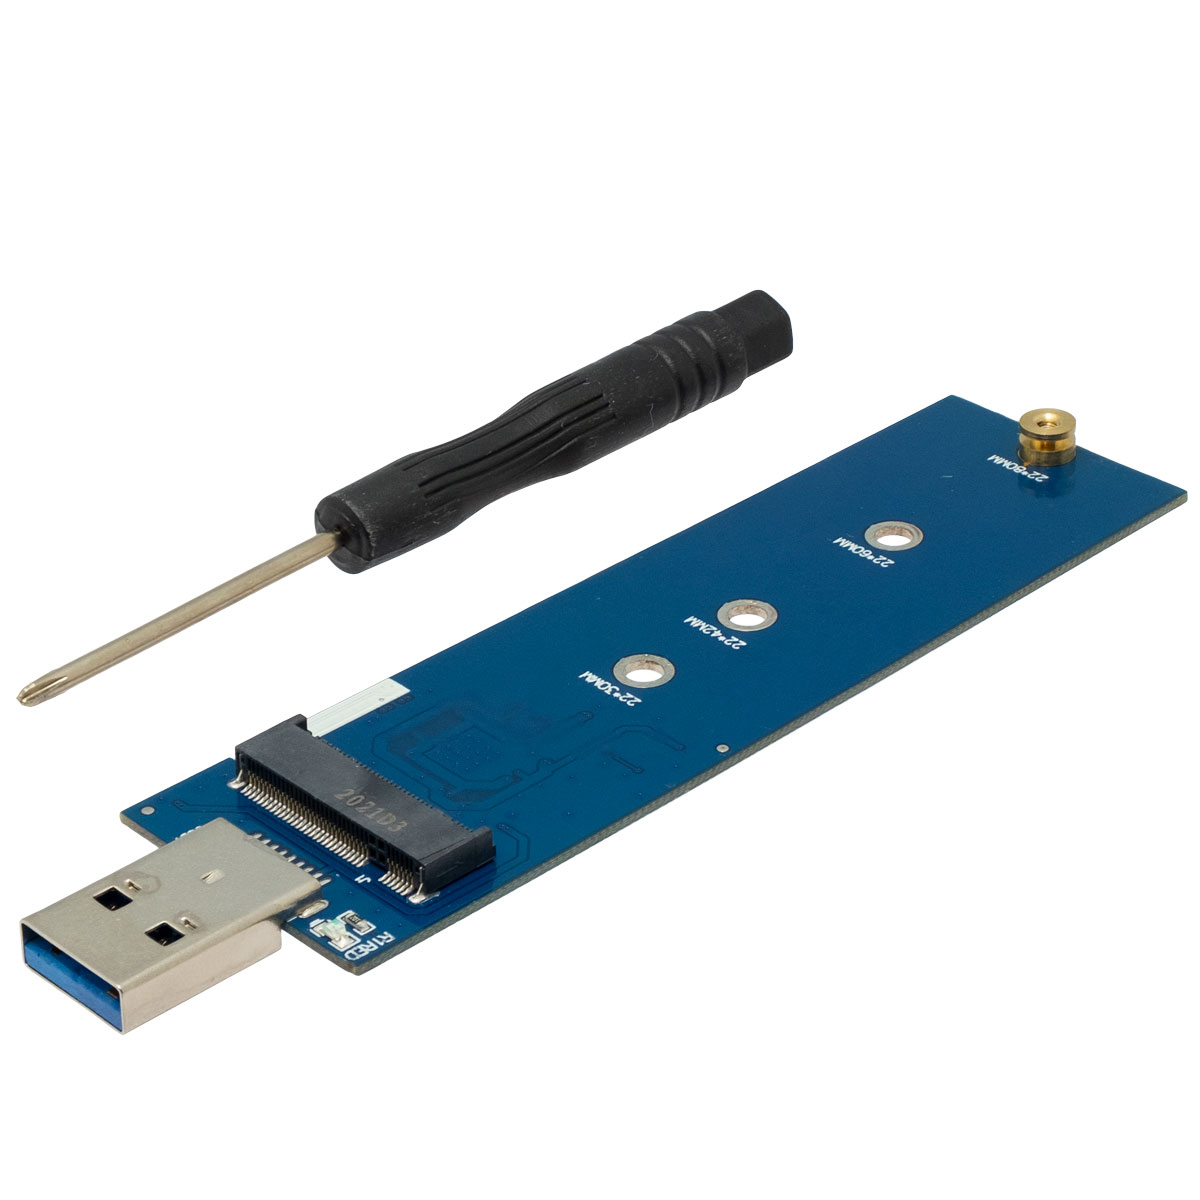 USB 3.0 to M.2 SATA SSD type B or B+M adapter